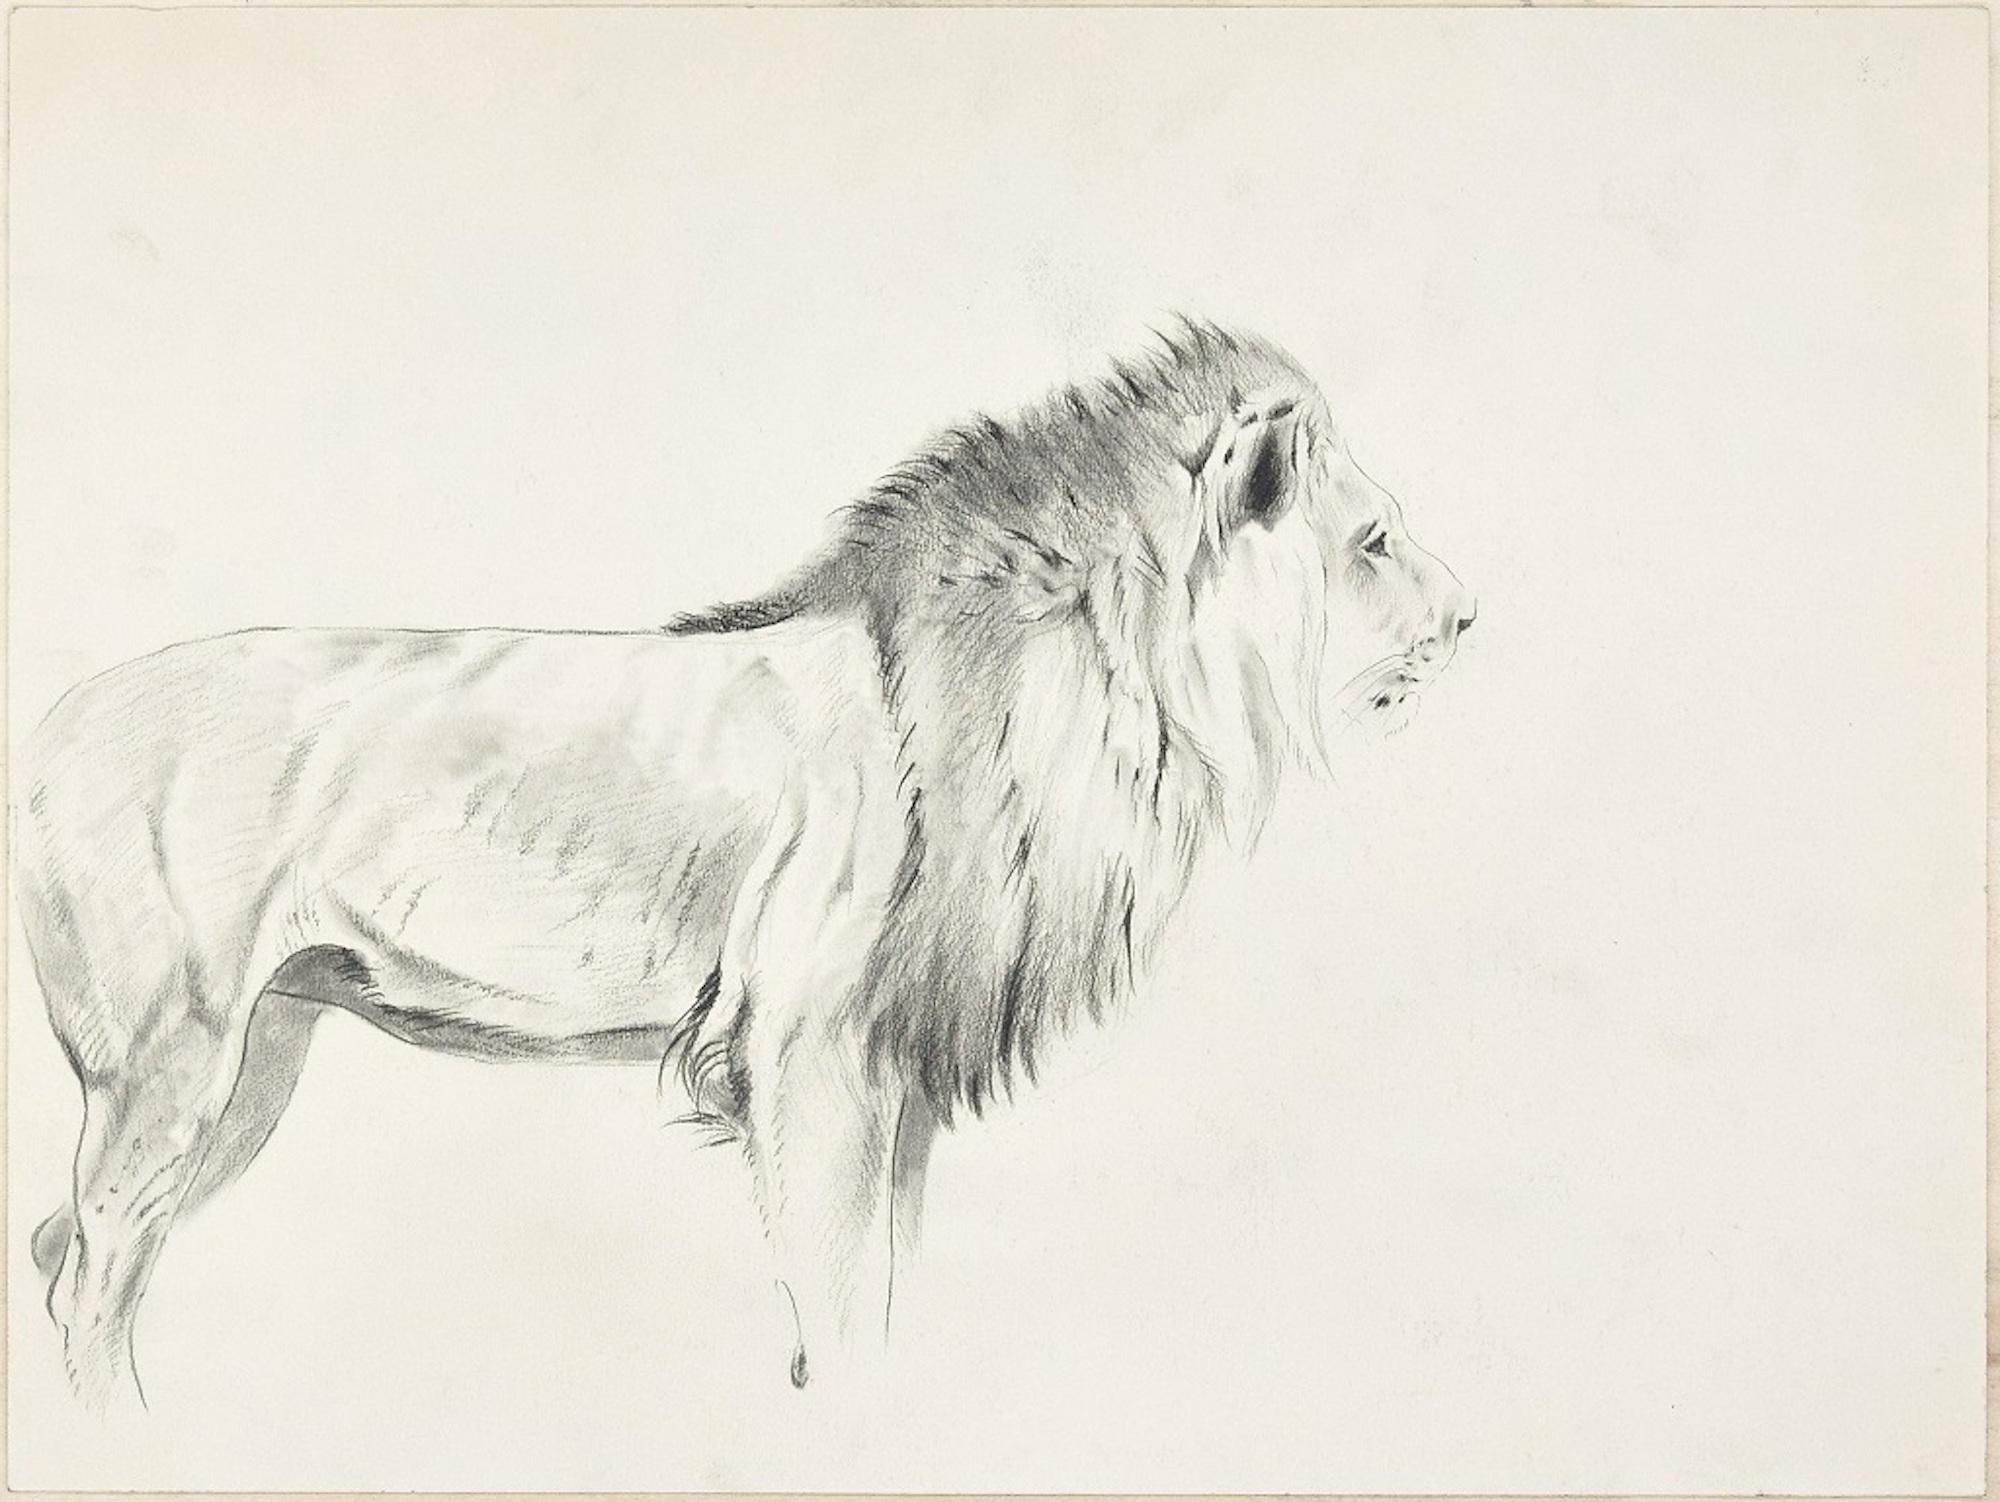 Wilhelm Lorenz Animal Art - Study of Lion and Lioness - Original Pencil Drawing by Willy Lorenz - 1940s